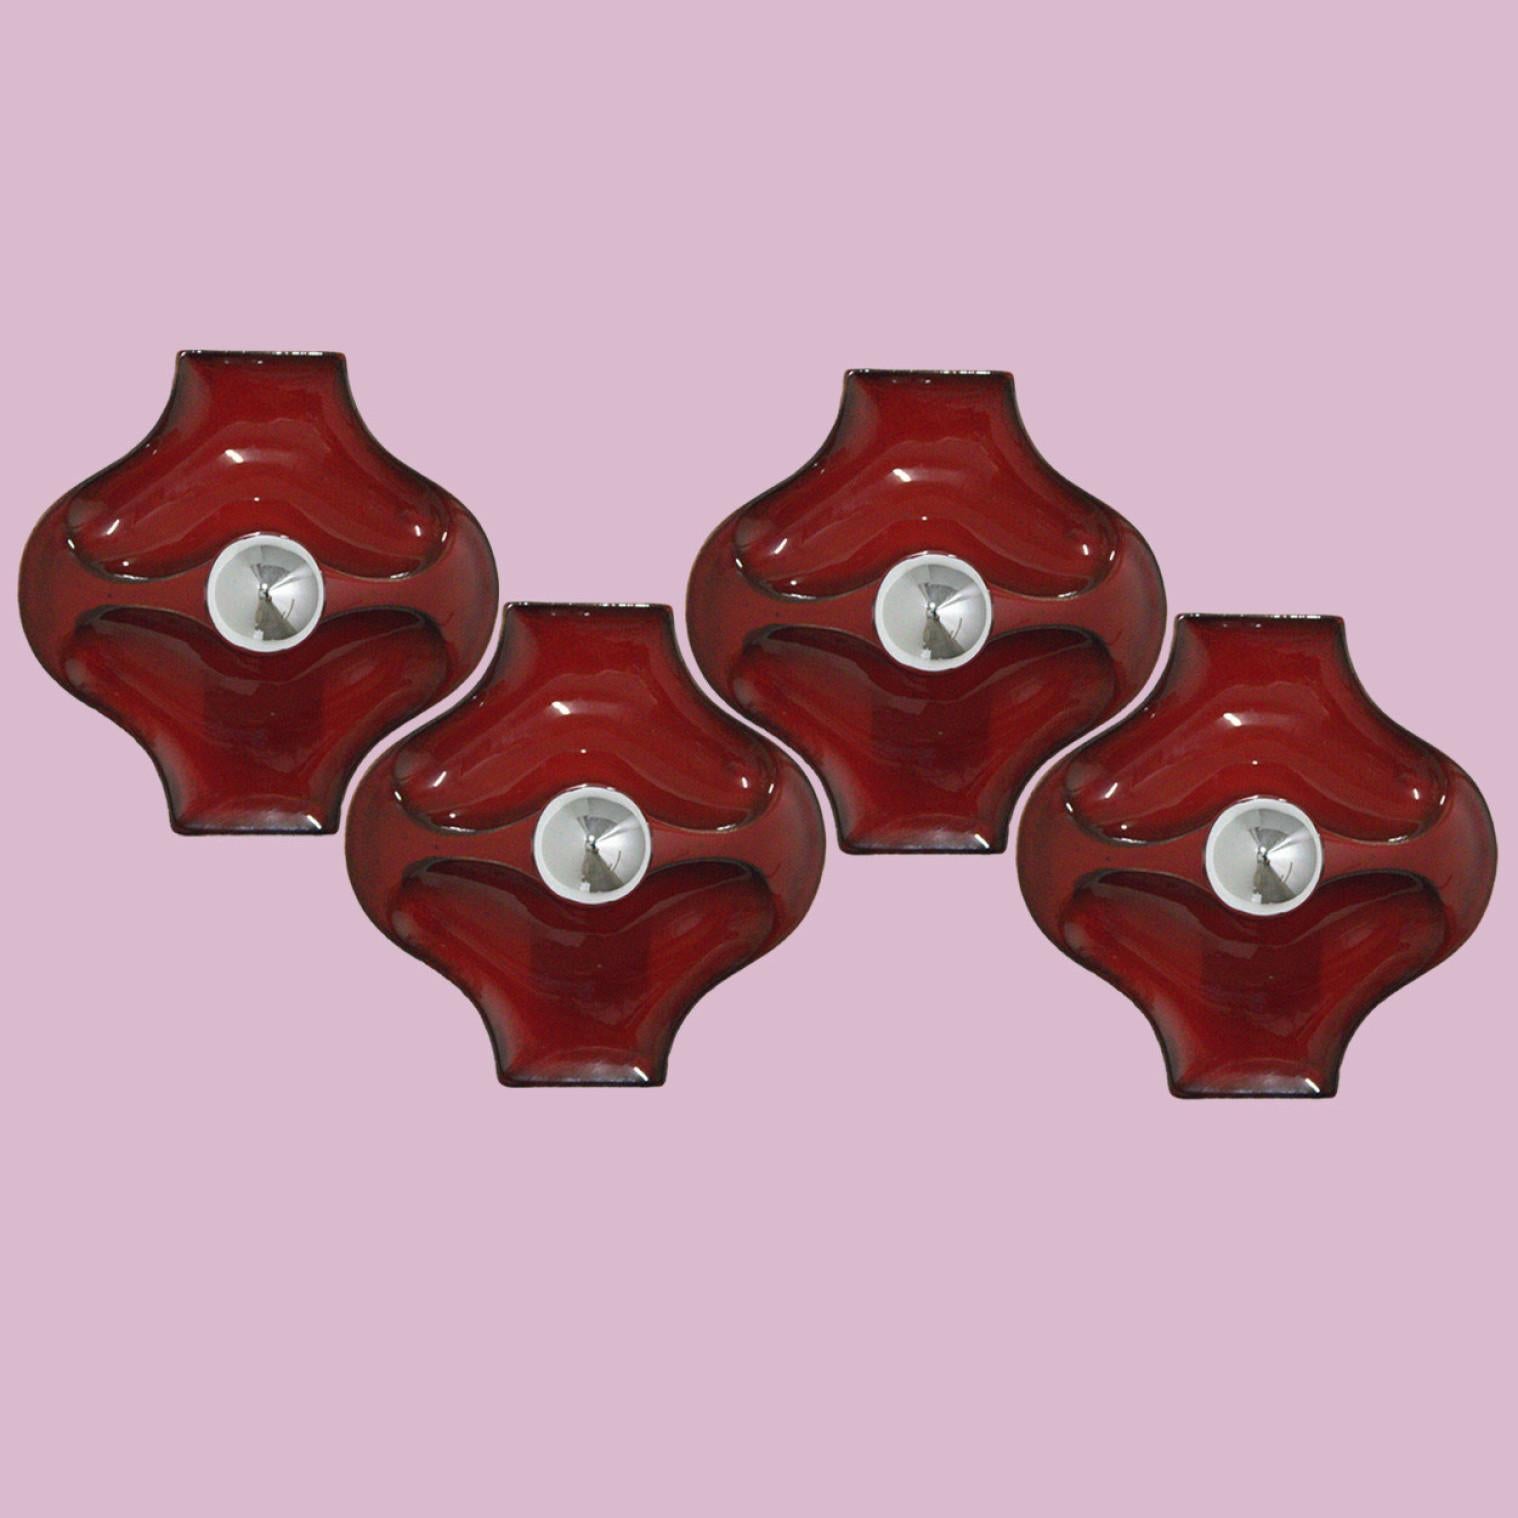 Glazed Red Ceramic Wall Lights by Hustadt Keramik, Germany, 1970 For Sale